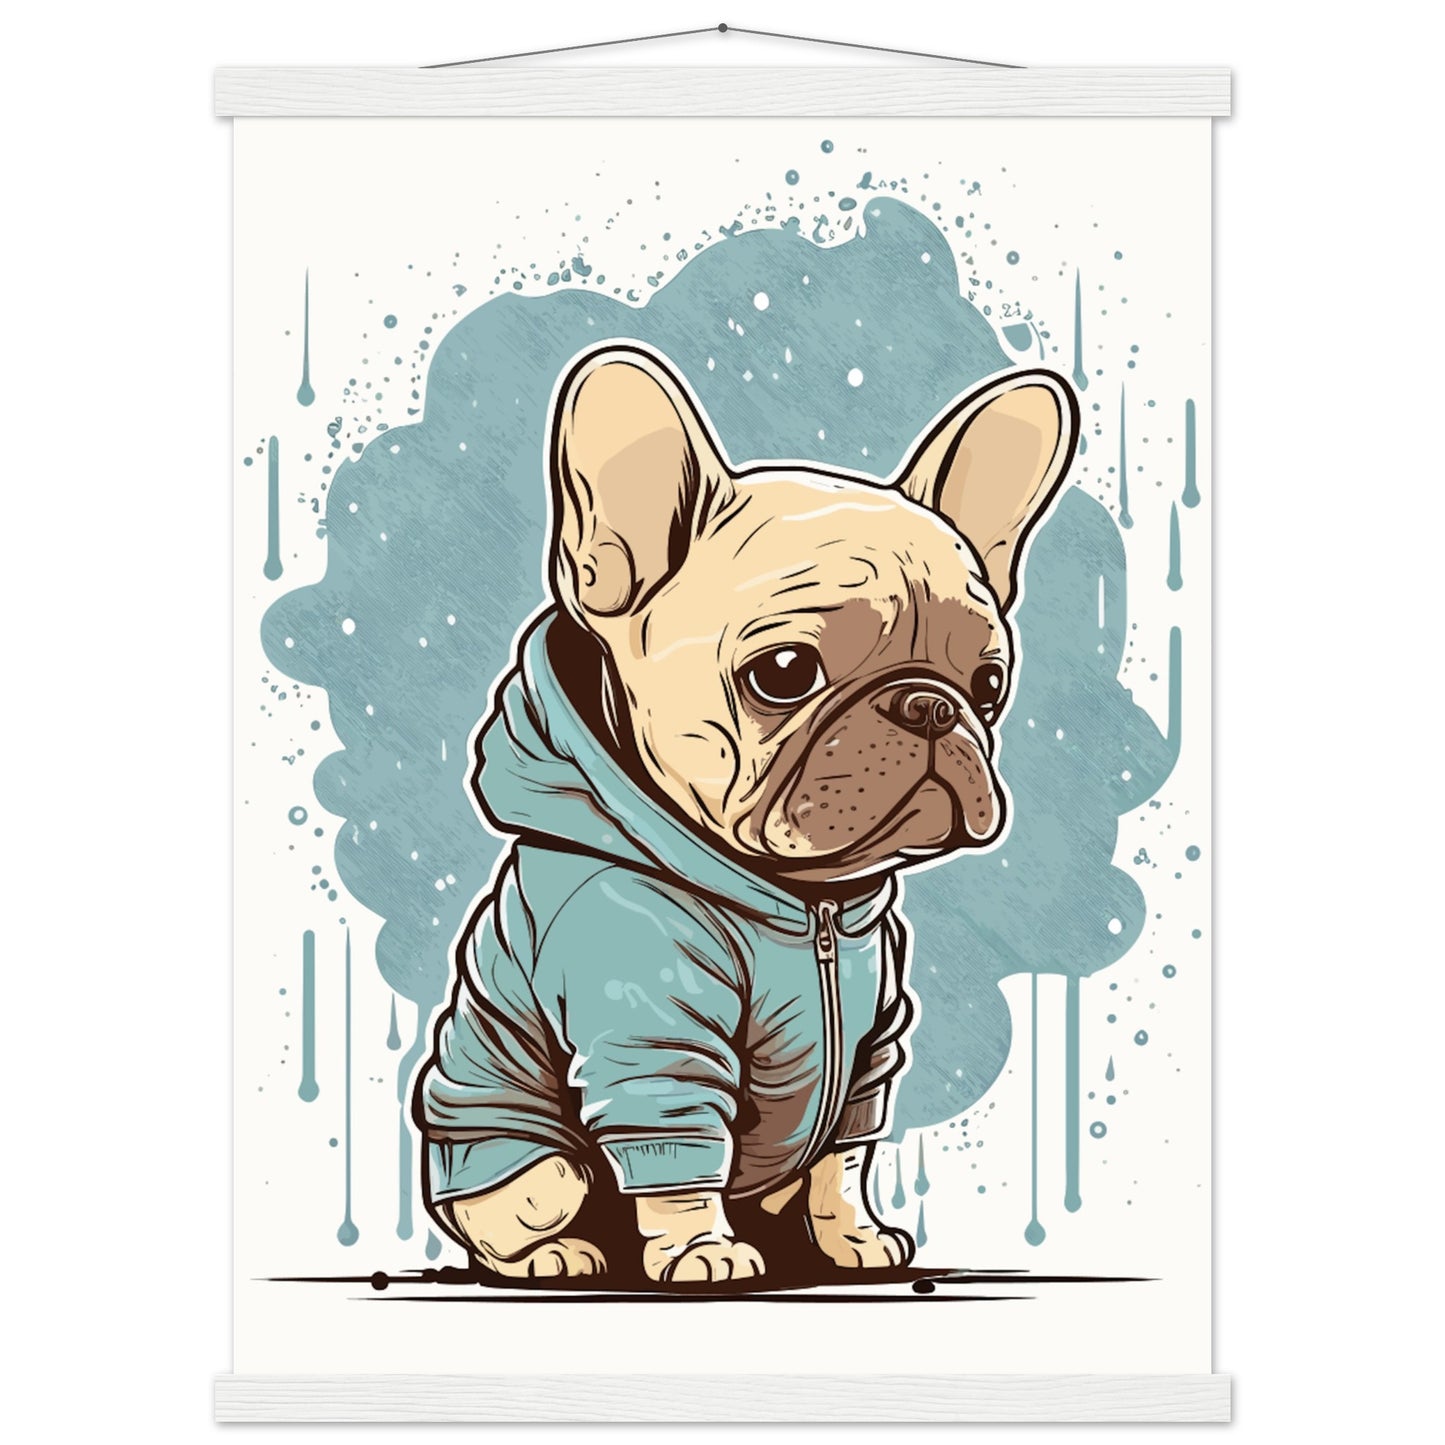 Dog Poster - Cute French Bulldog with light hoodie - Premium Matte Poster with Hanger 